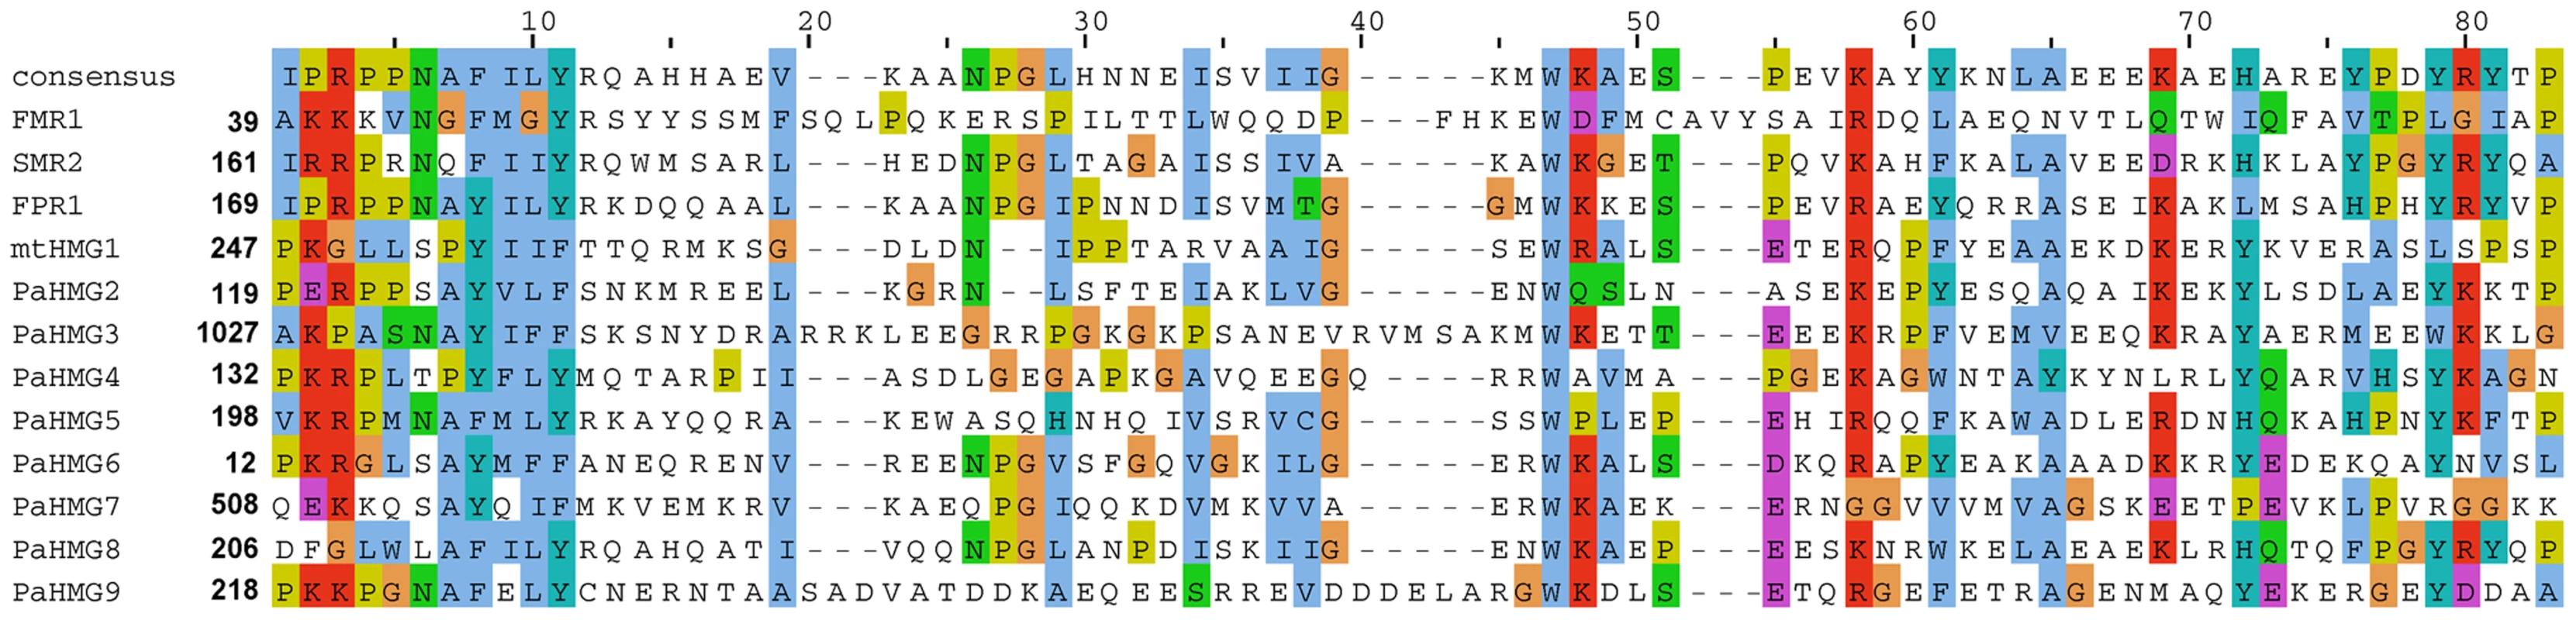 Alignment of HMG domains from the 12 HMG-box proteins of <i>P. anserina</i>.